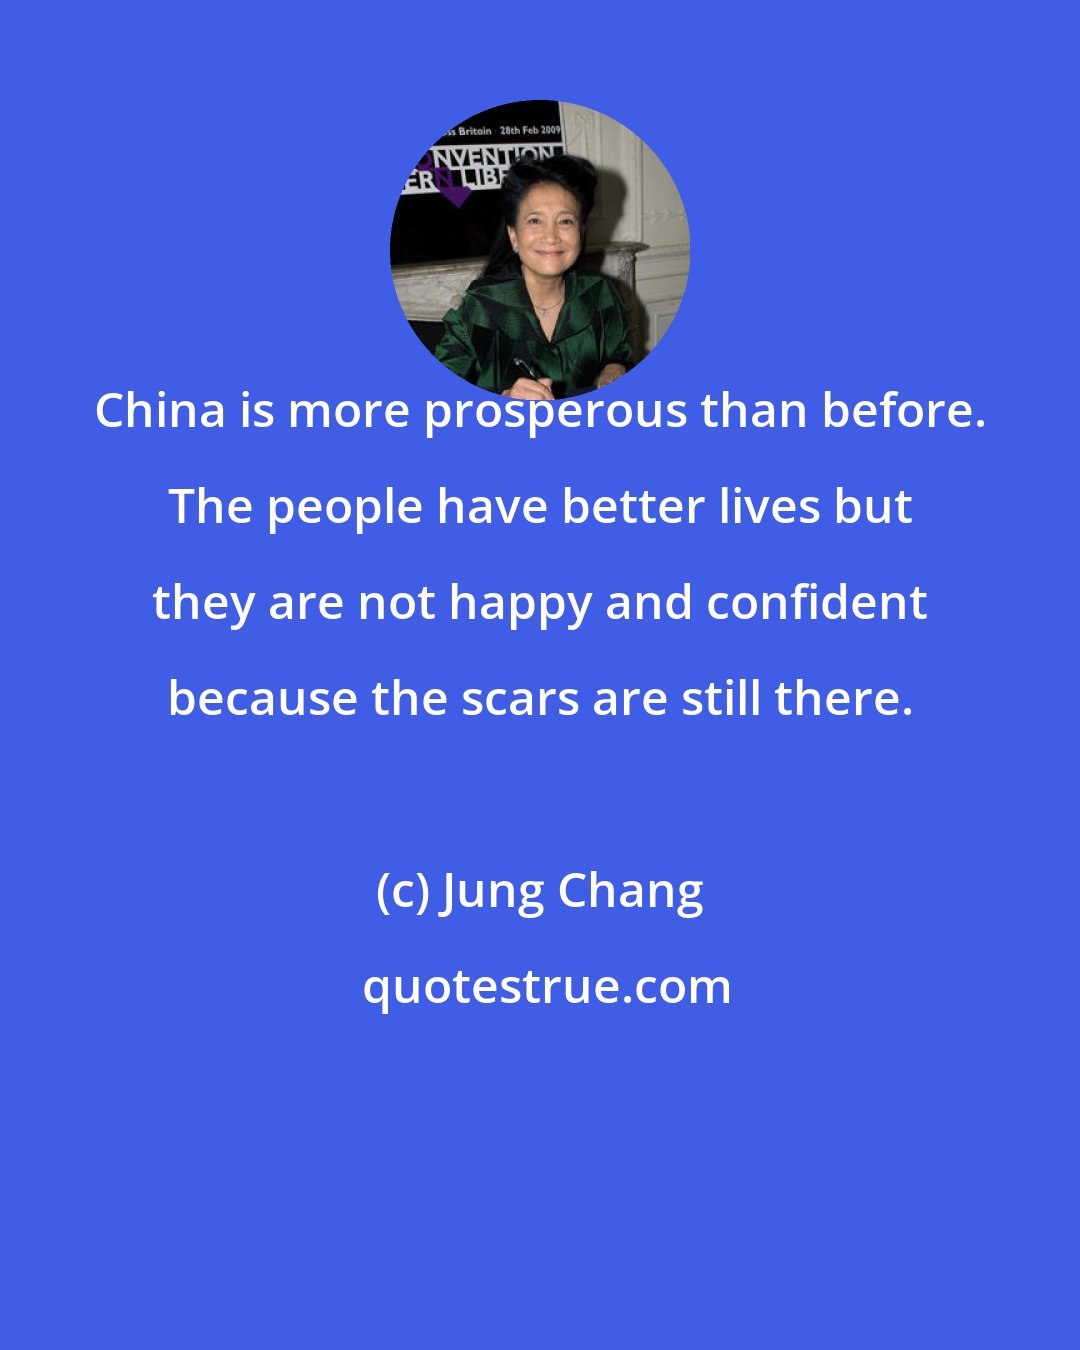 Jung Chang: China is more prosperous than before. The people have better lives but they are not happy and confident because the scars are still there.